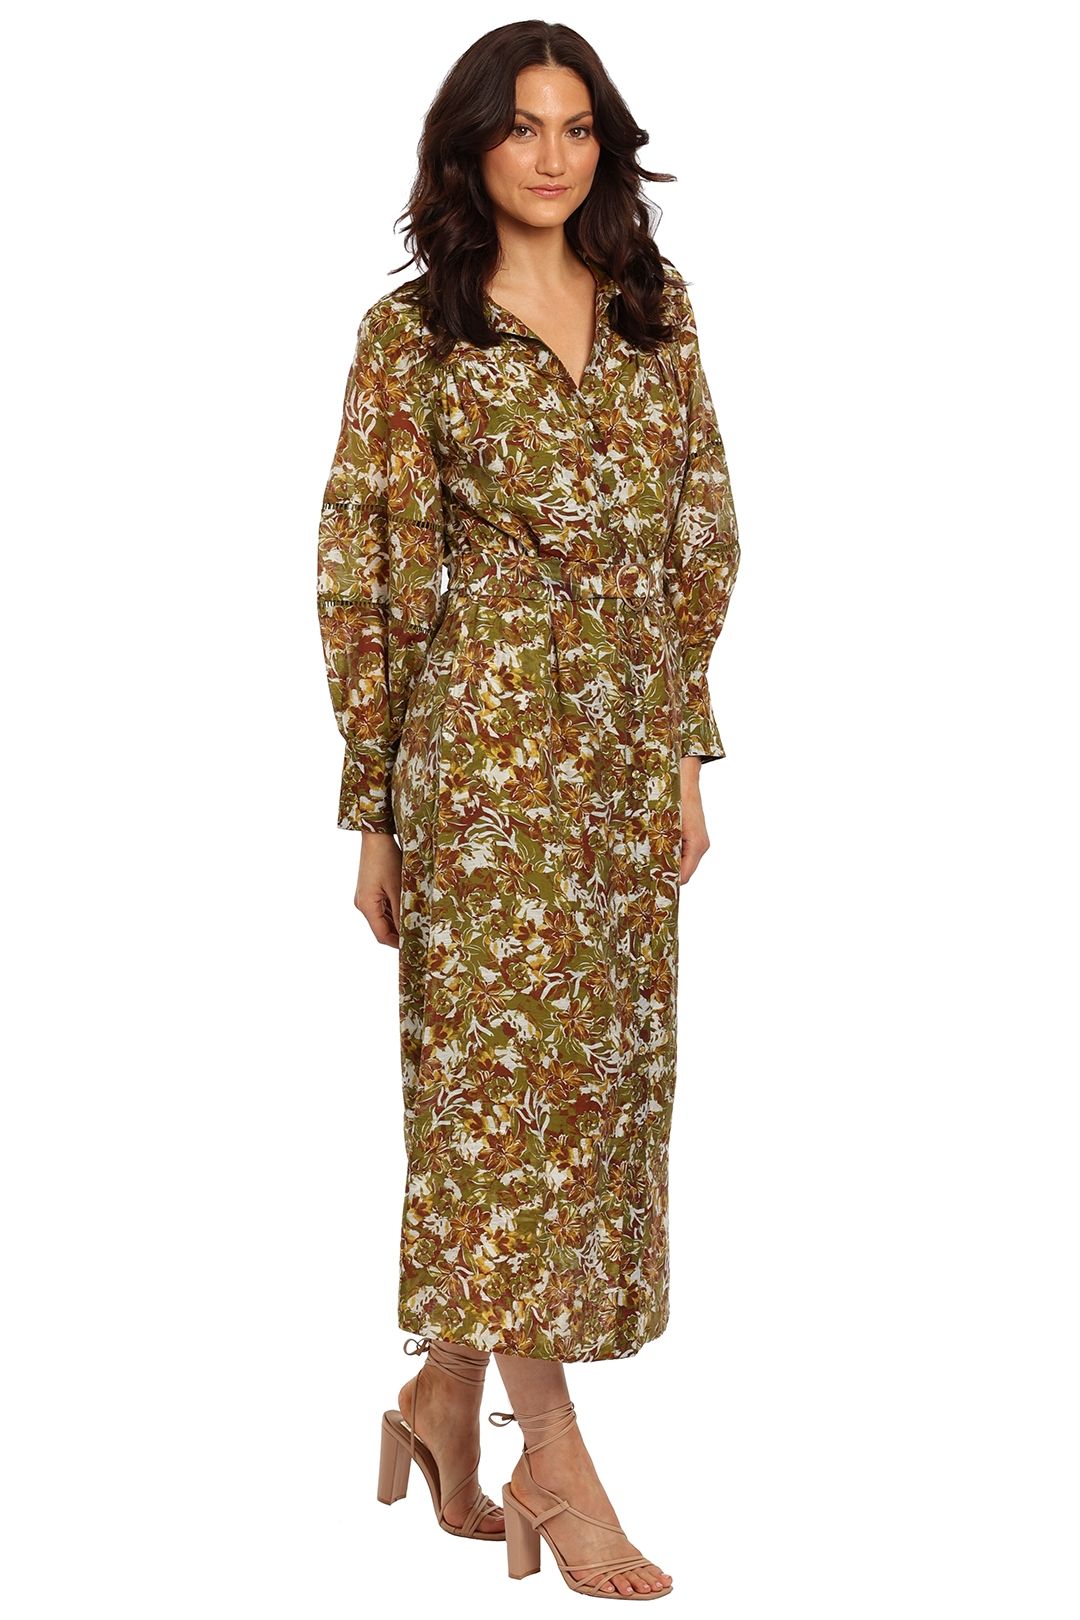 Ministry of Style Floral In Disguise Maxi Dress